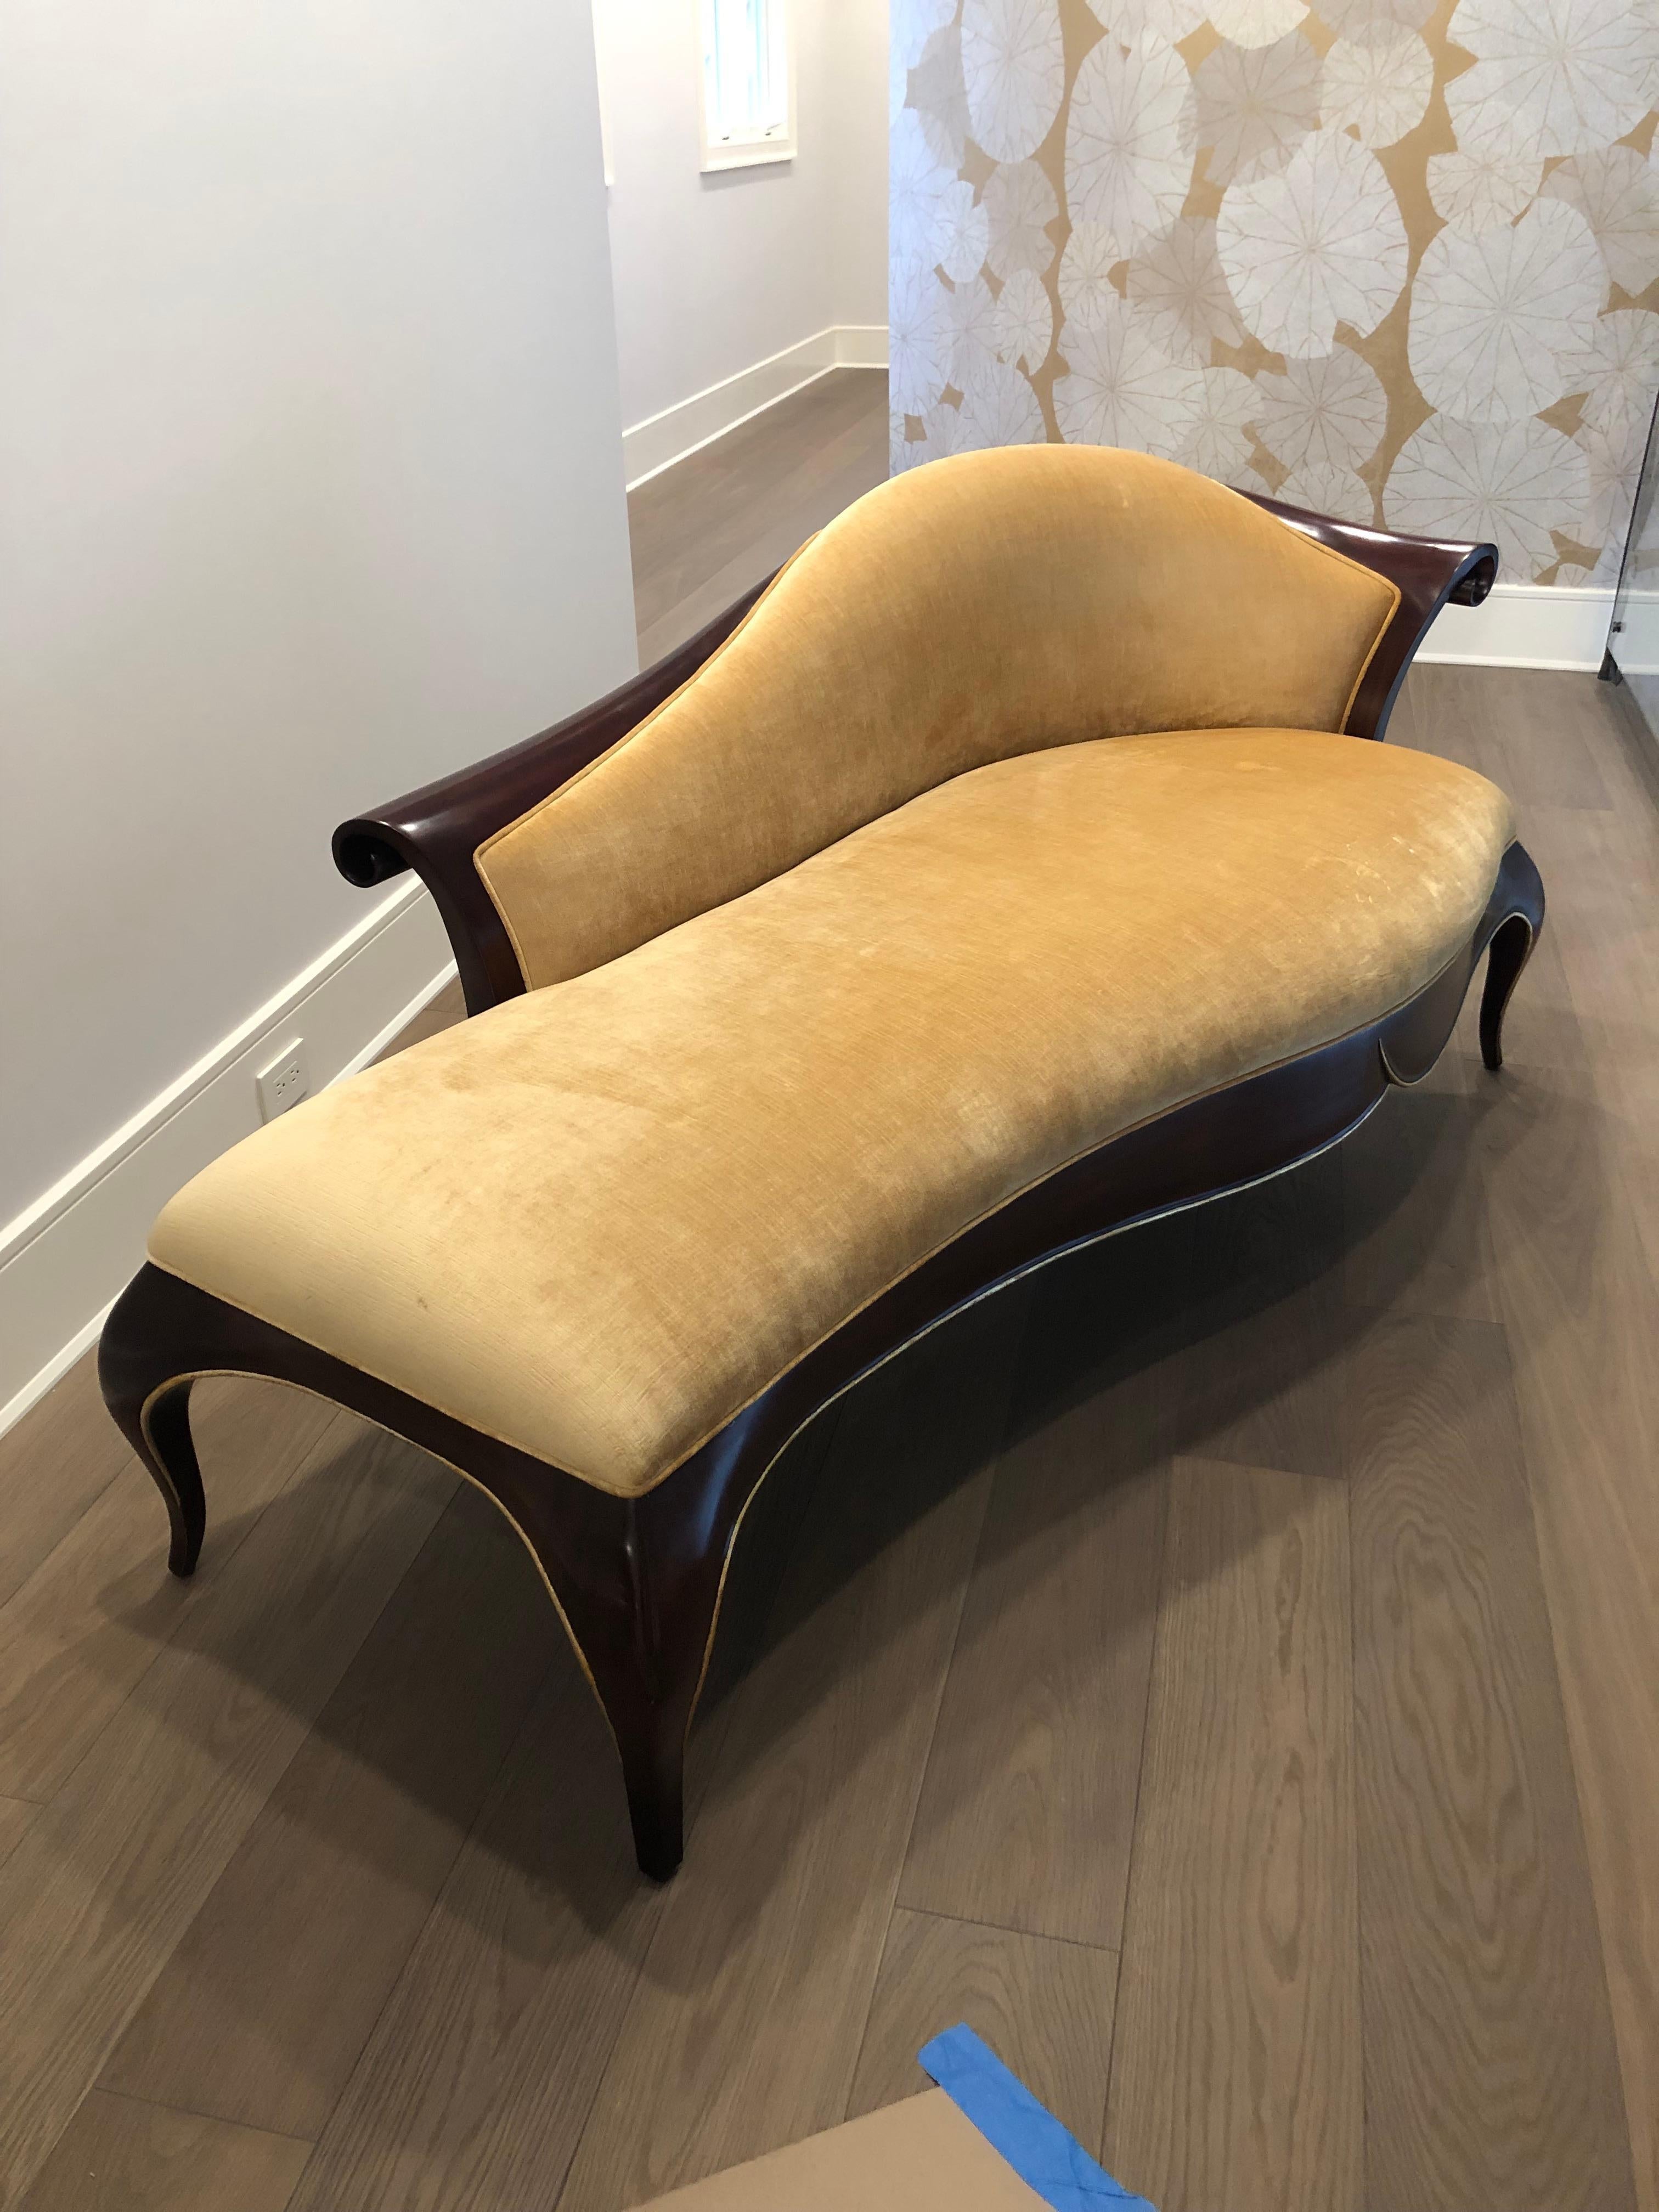 American Sensual Luxurious Christopher Guy Sofia Chaise Longue For Sale